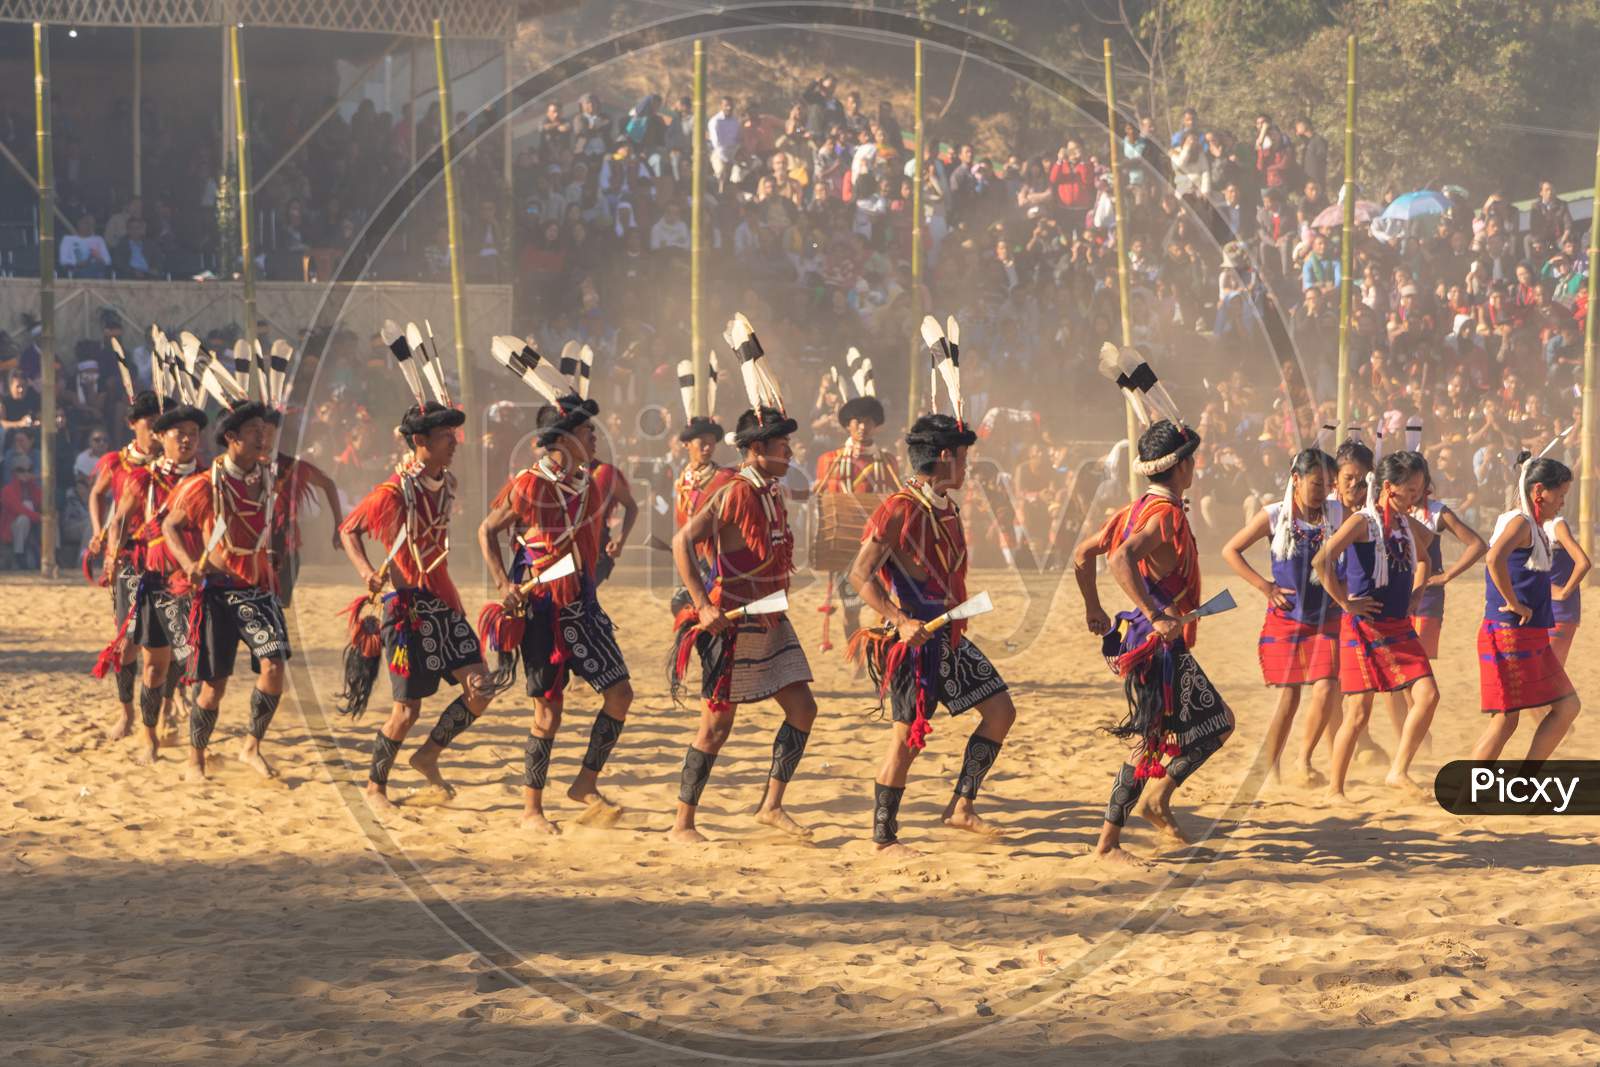 Group of naga tribesmen and women dressed in their traditional attire dancing